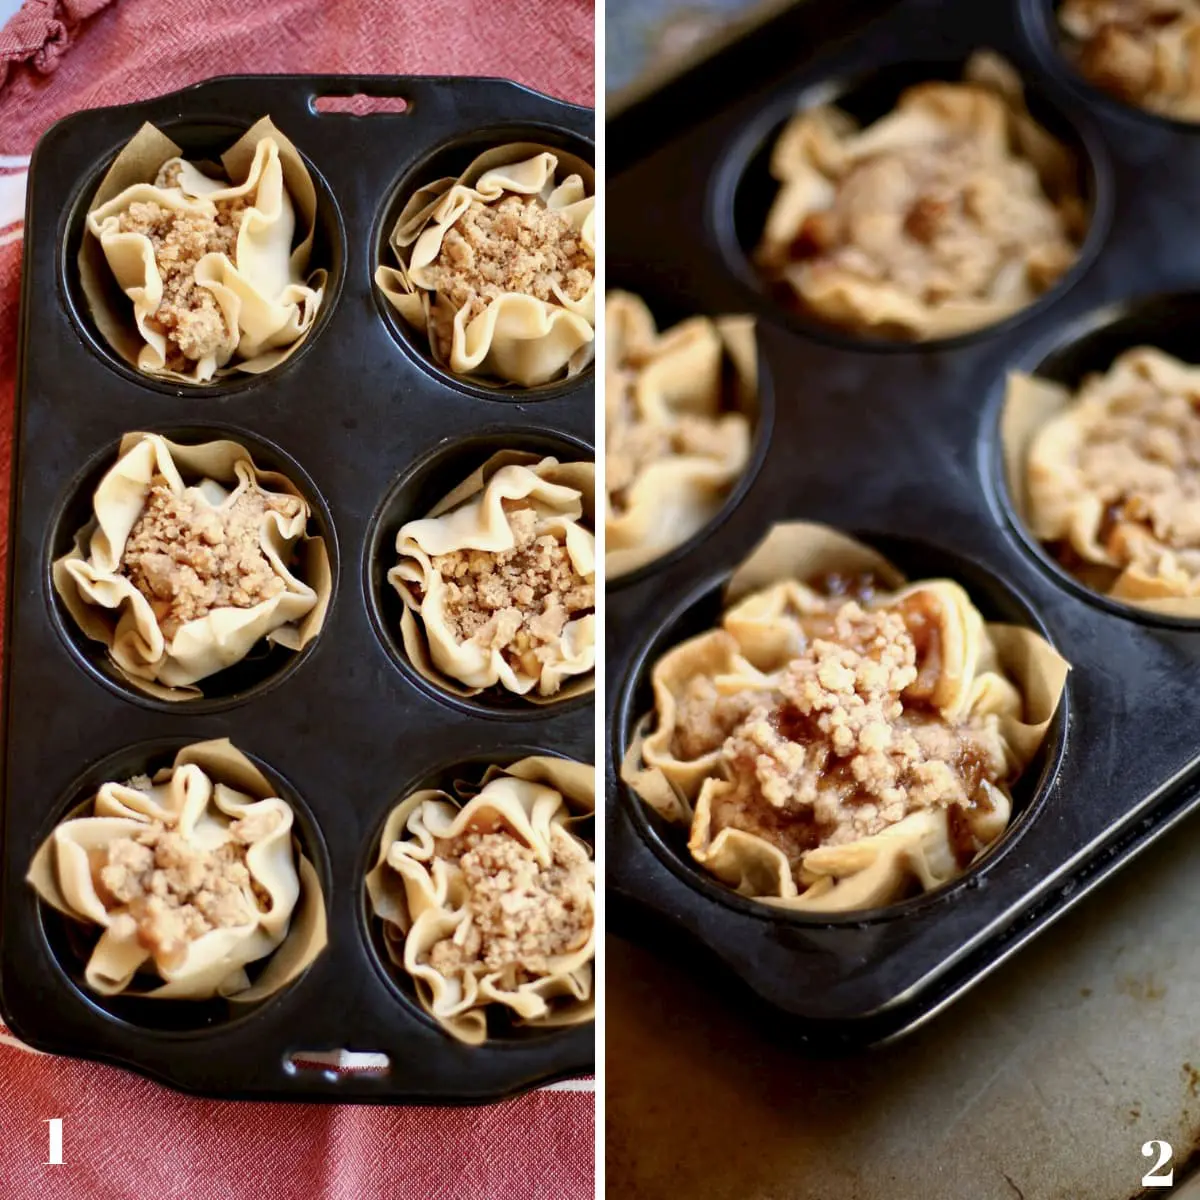 Before and after photos of uncooked and cooked muffin tin pies